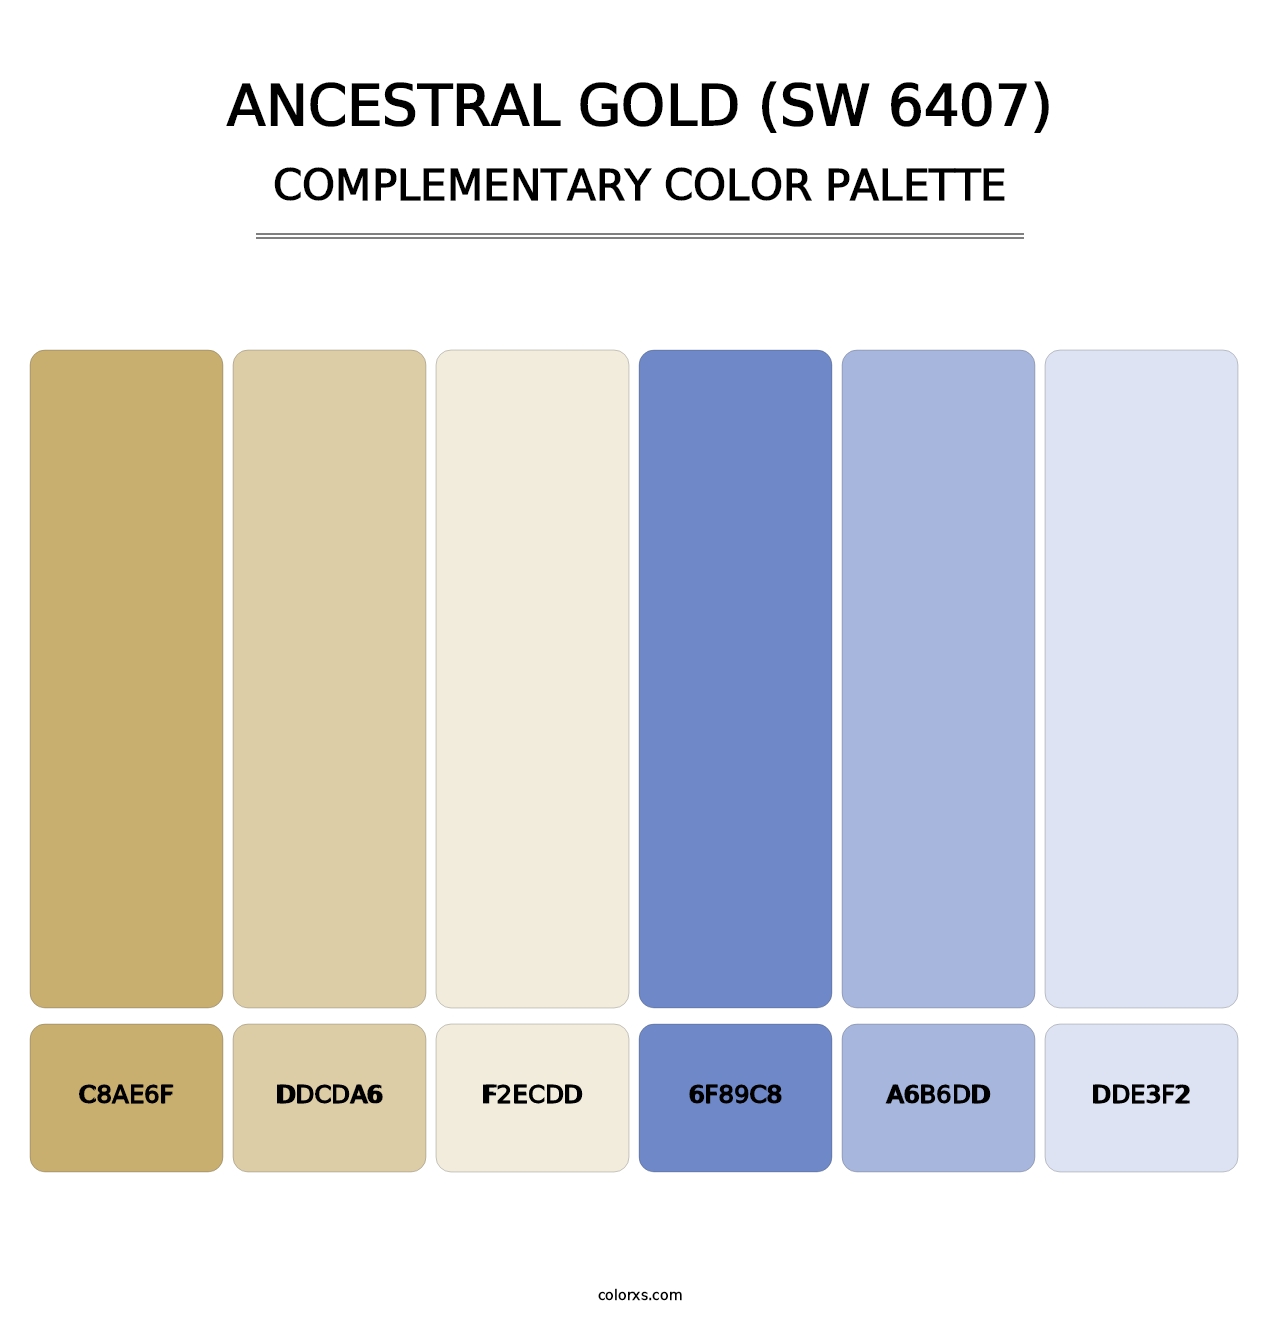 Ancestral Gold (SW 6407) - Complementary Color Palette